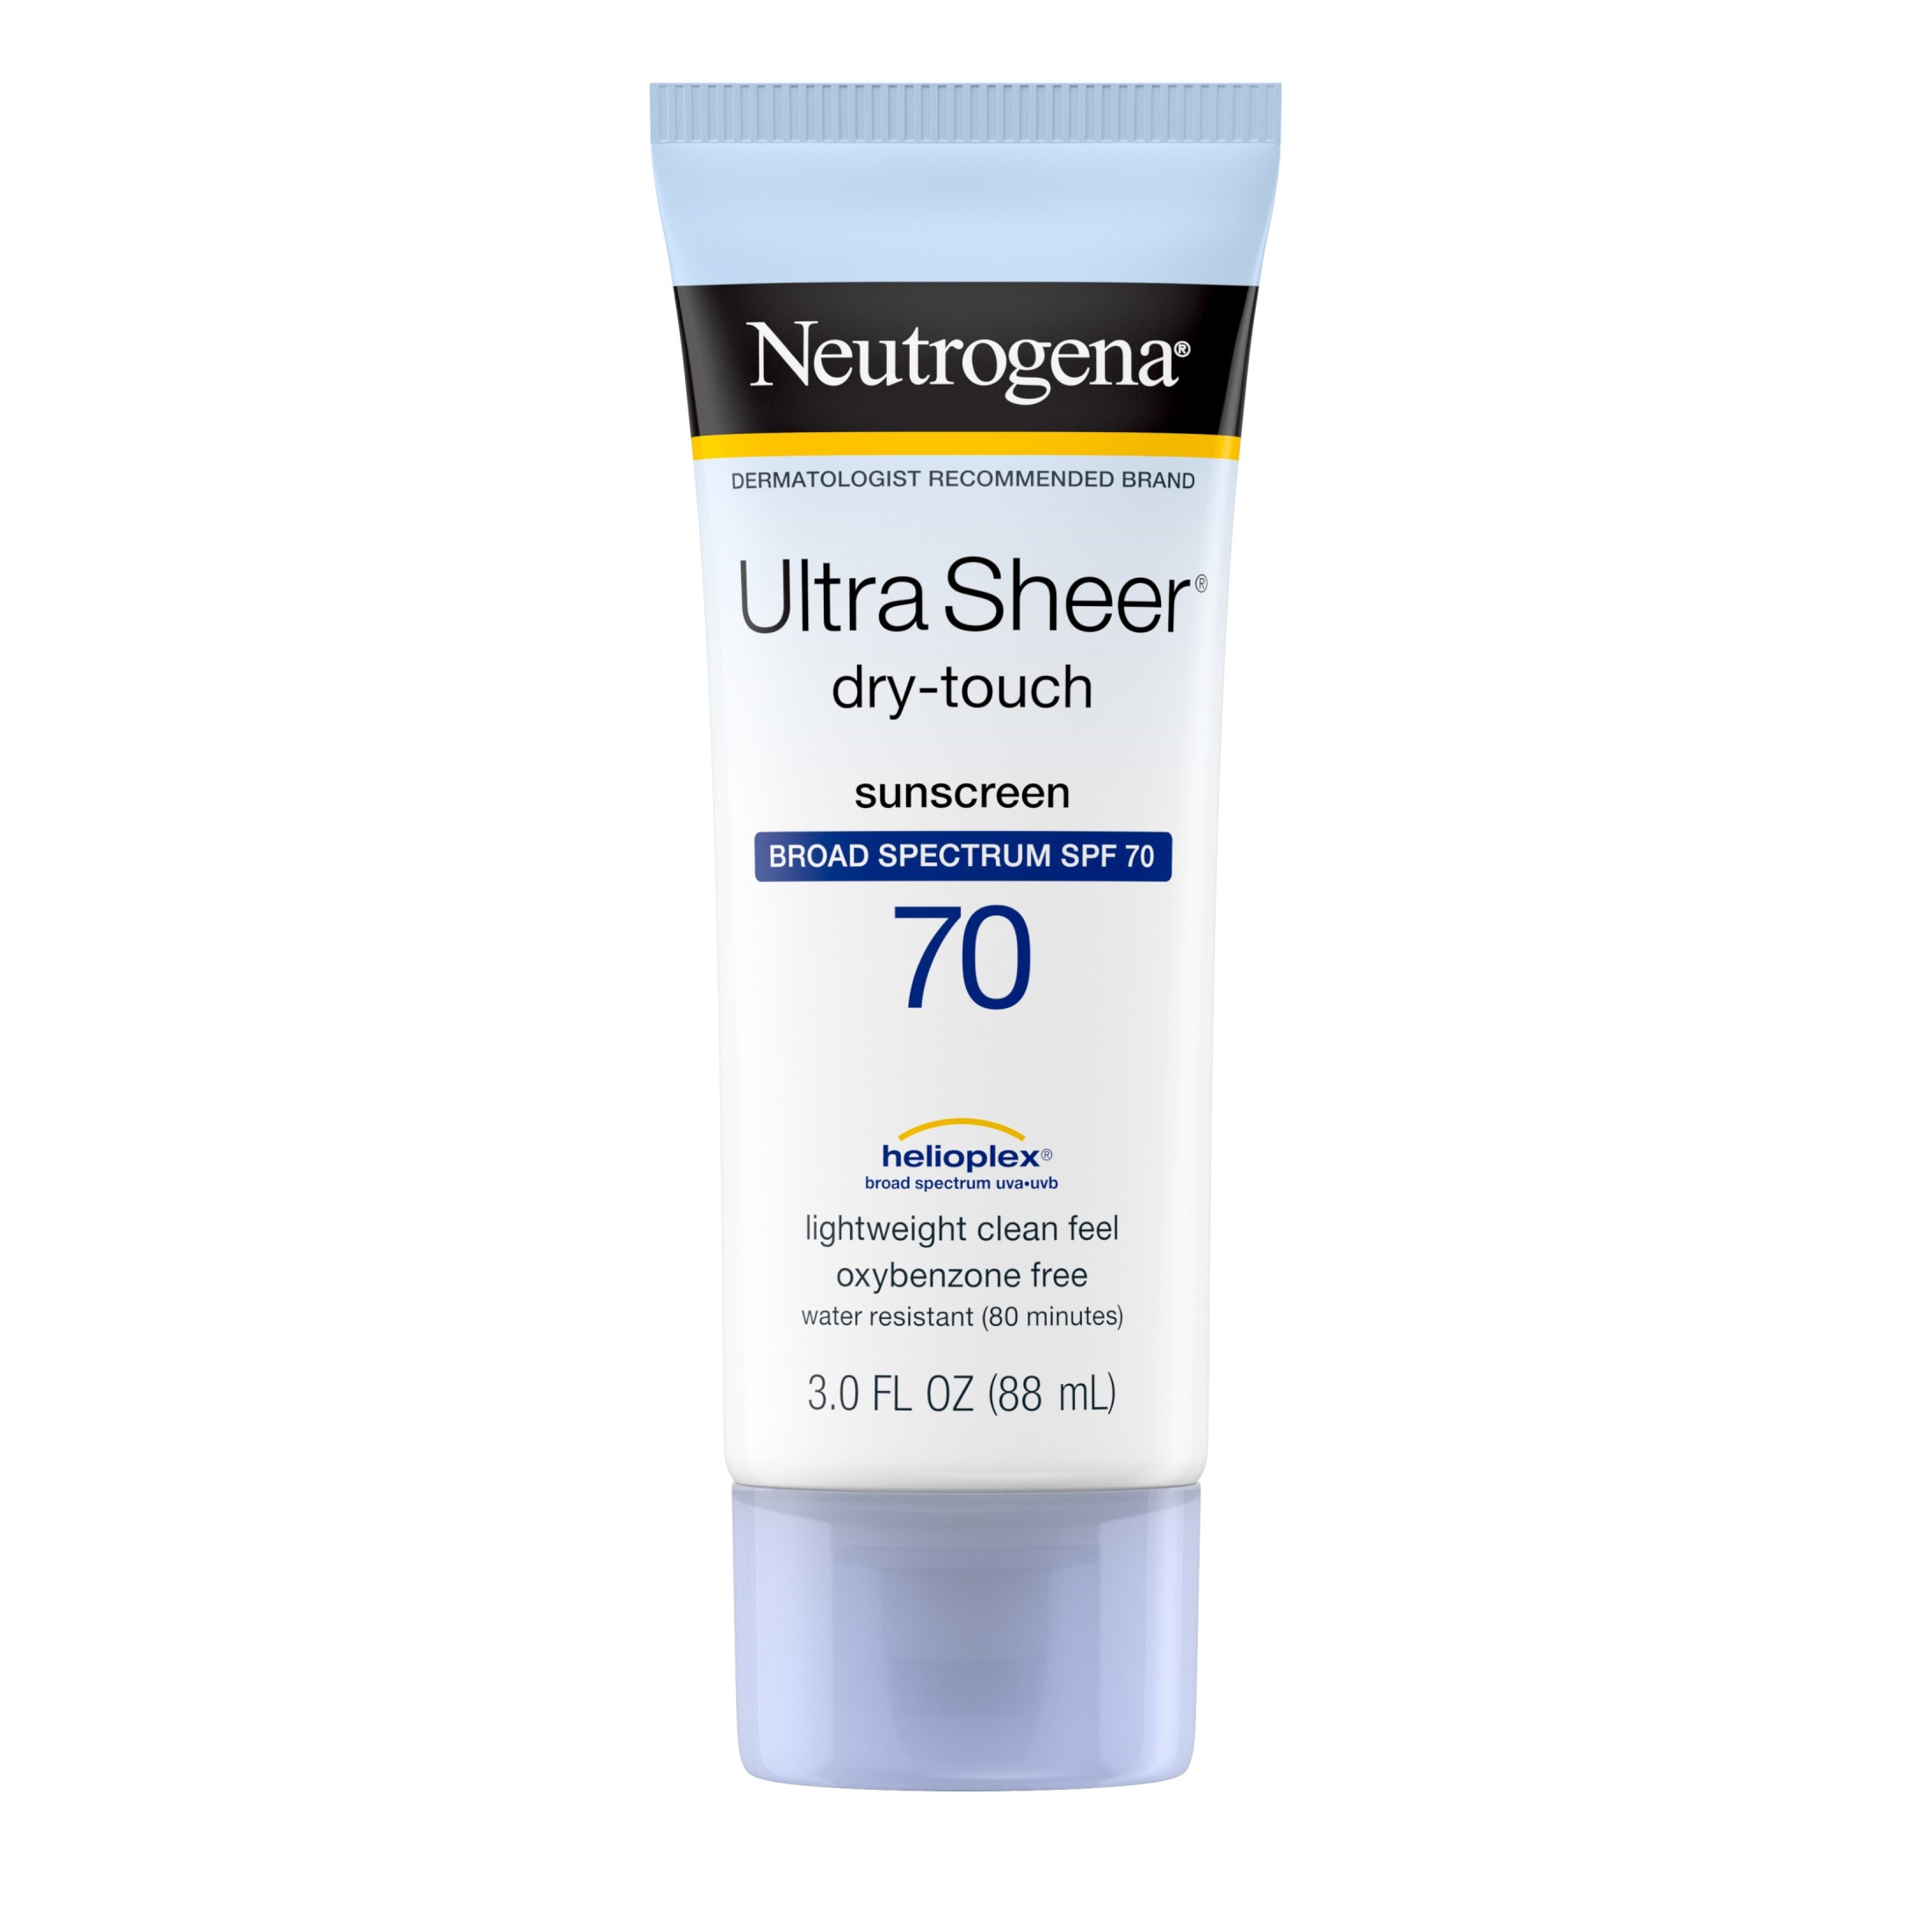 Neutrogena Ultra Sheer Dry-Touch Sunscreen Lotion, SPF 70 Face Sunblock, 3 fl oz - image 1 of 10